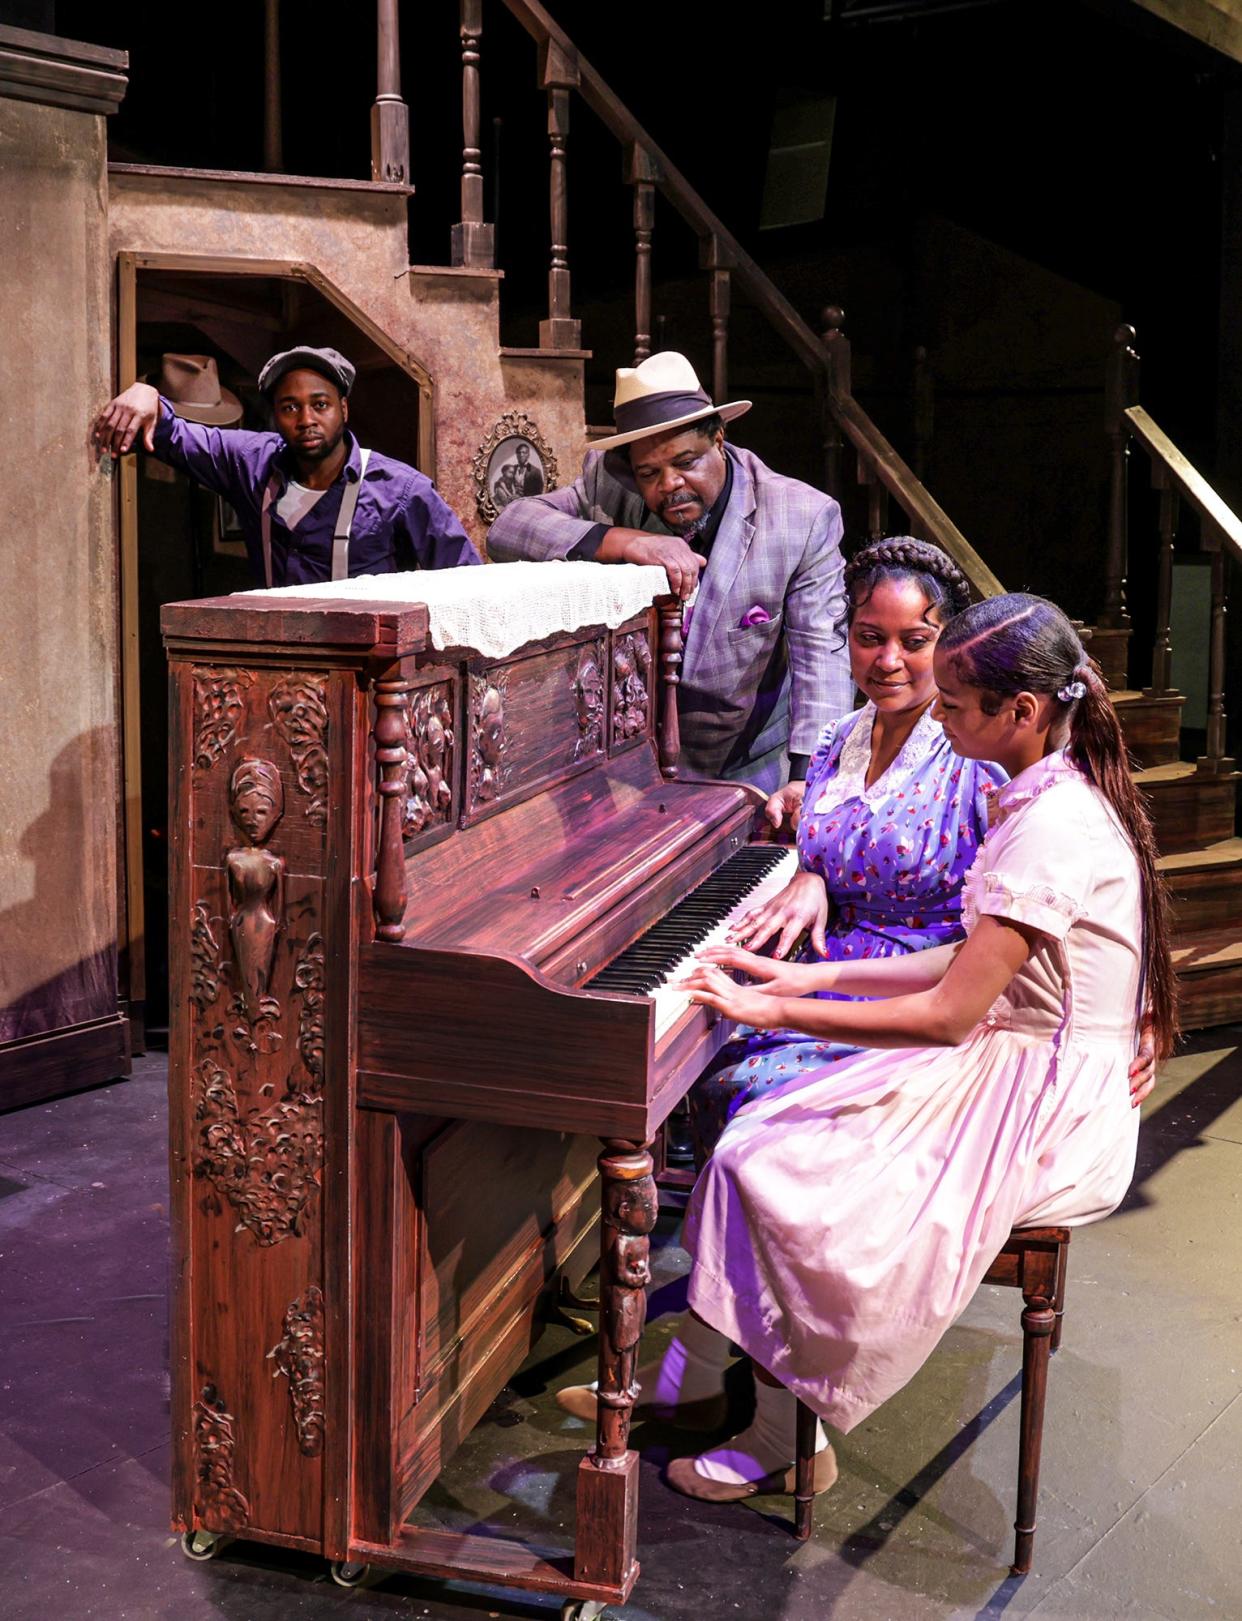 August Wilson’s "The Piano Lesson" features (from left) Emmett Saah Phillips Jr., Aaron Smith, Tiffany Johnson, and Larryah Travis. The show is a co-production of Pyramid Theatre Co. and The Des Moines Playhouse, performed at The Playhouse Feb. 3-19, 2023.